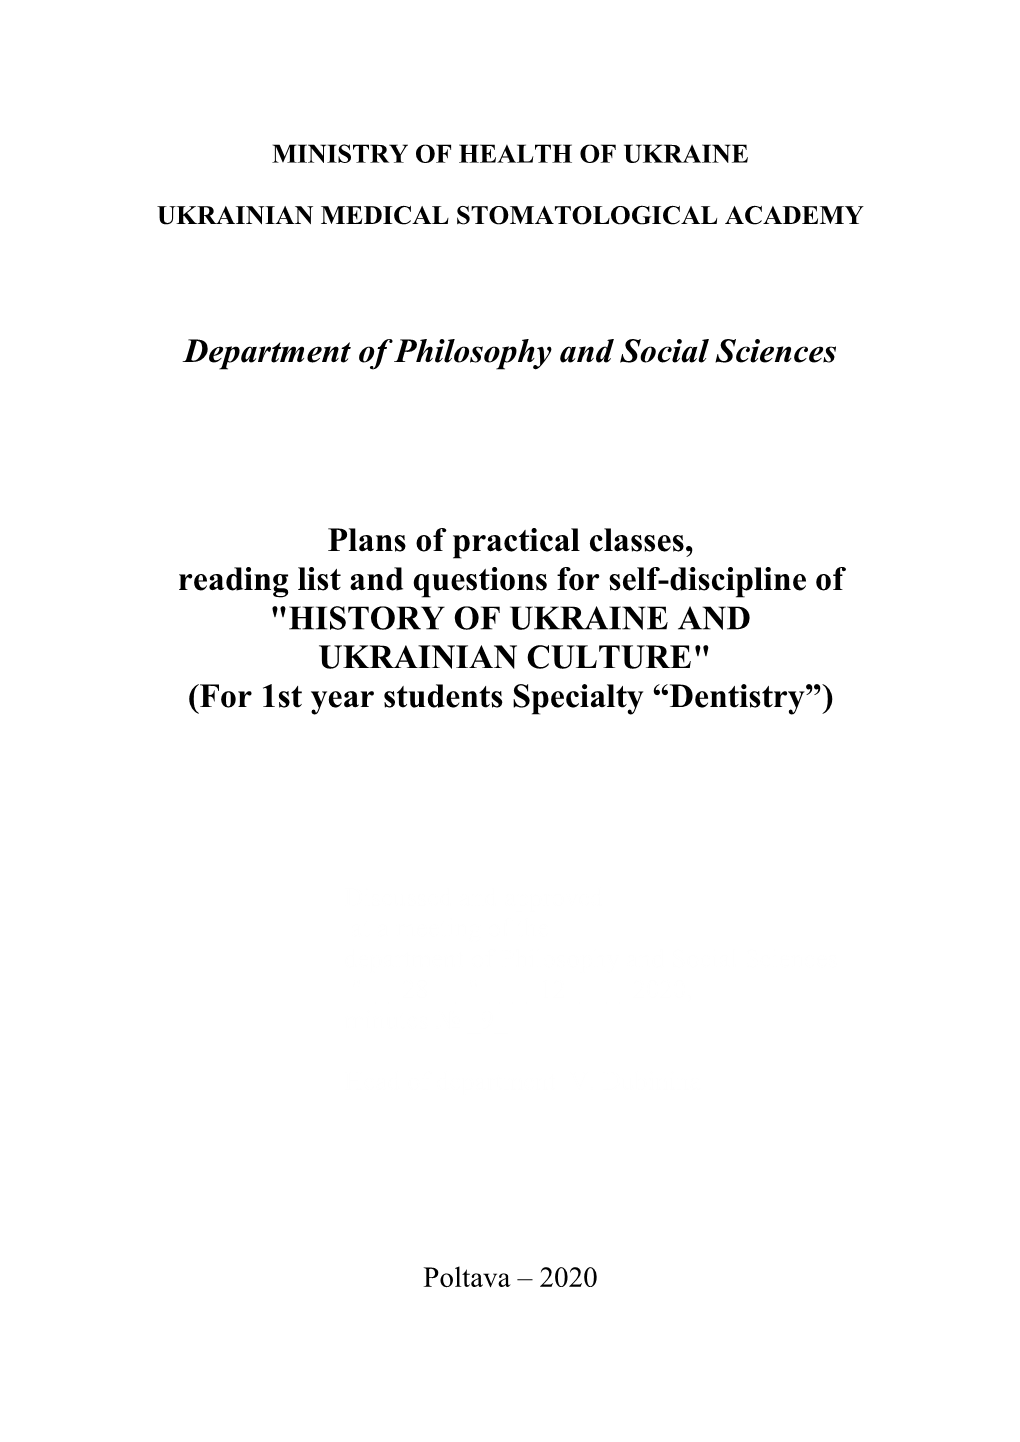 Department of Philosophy and Social Sciences Plans of Practical